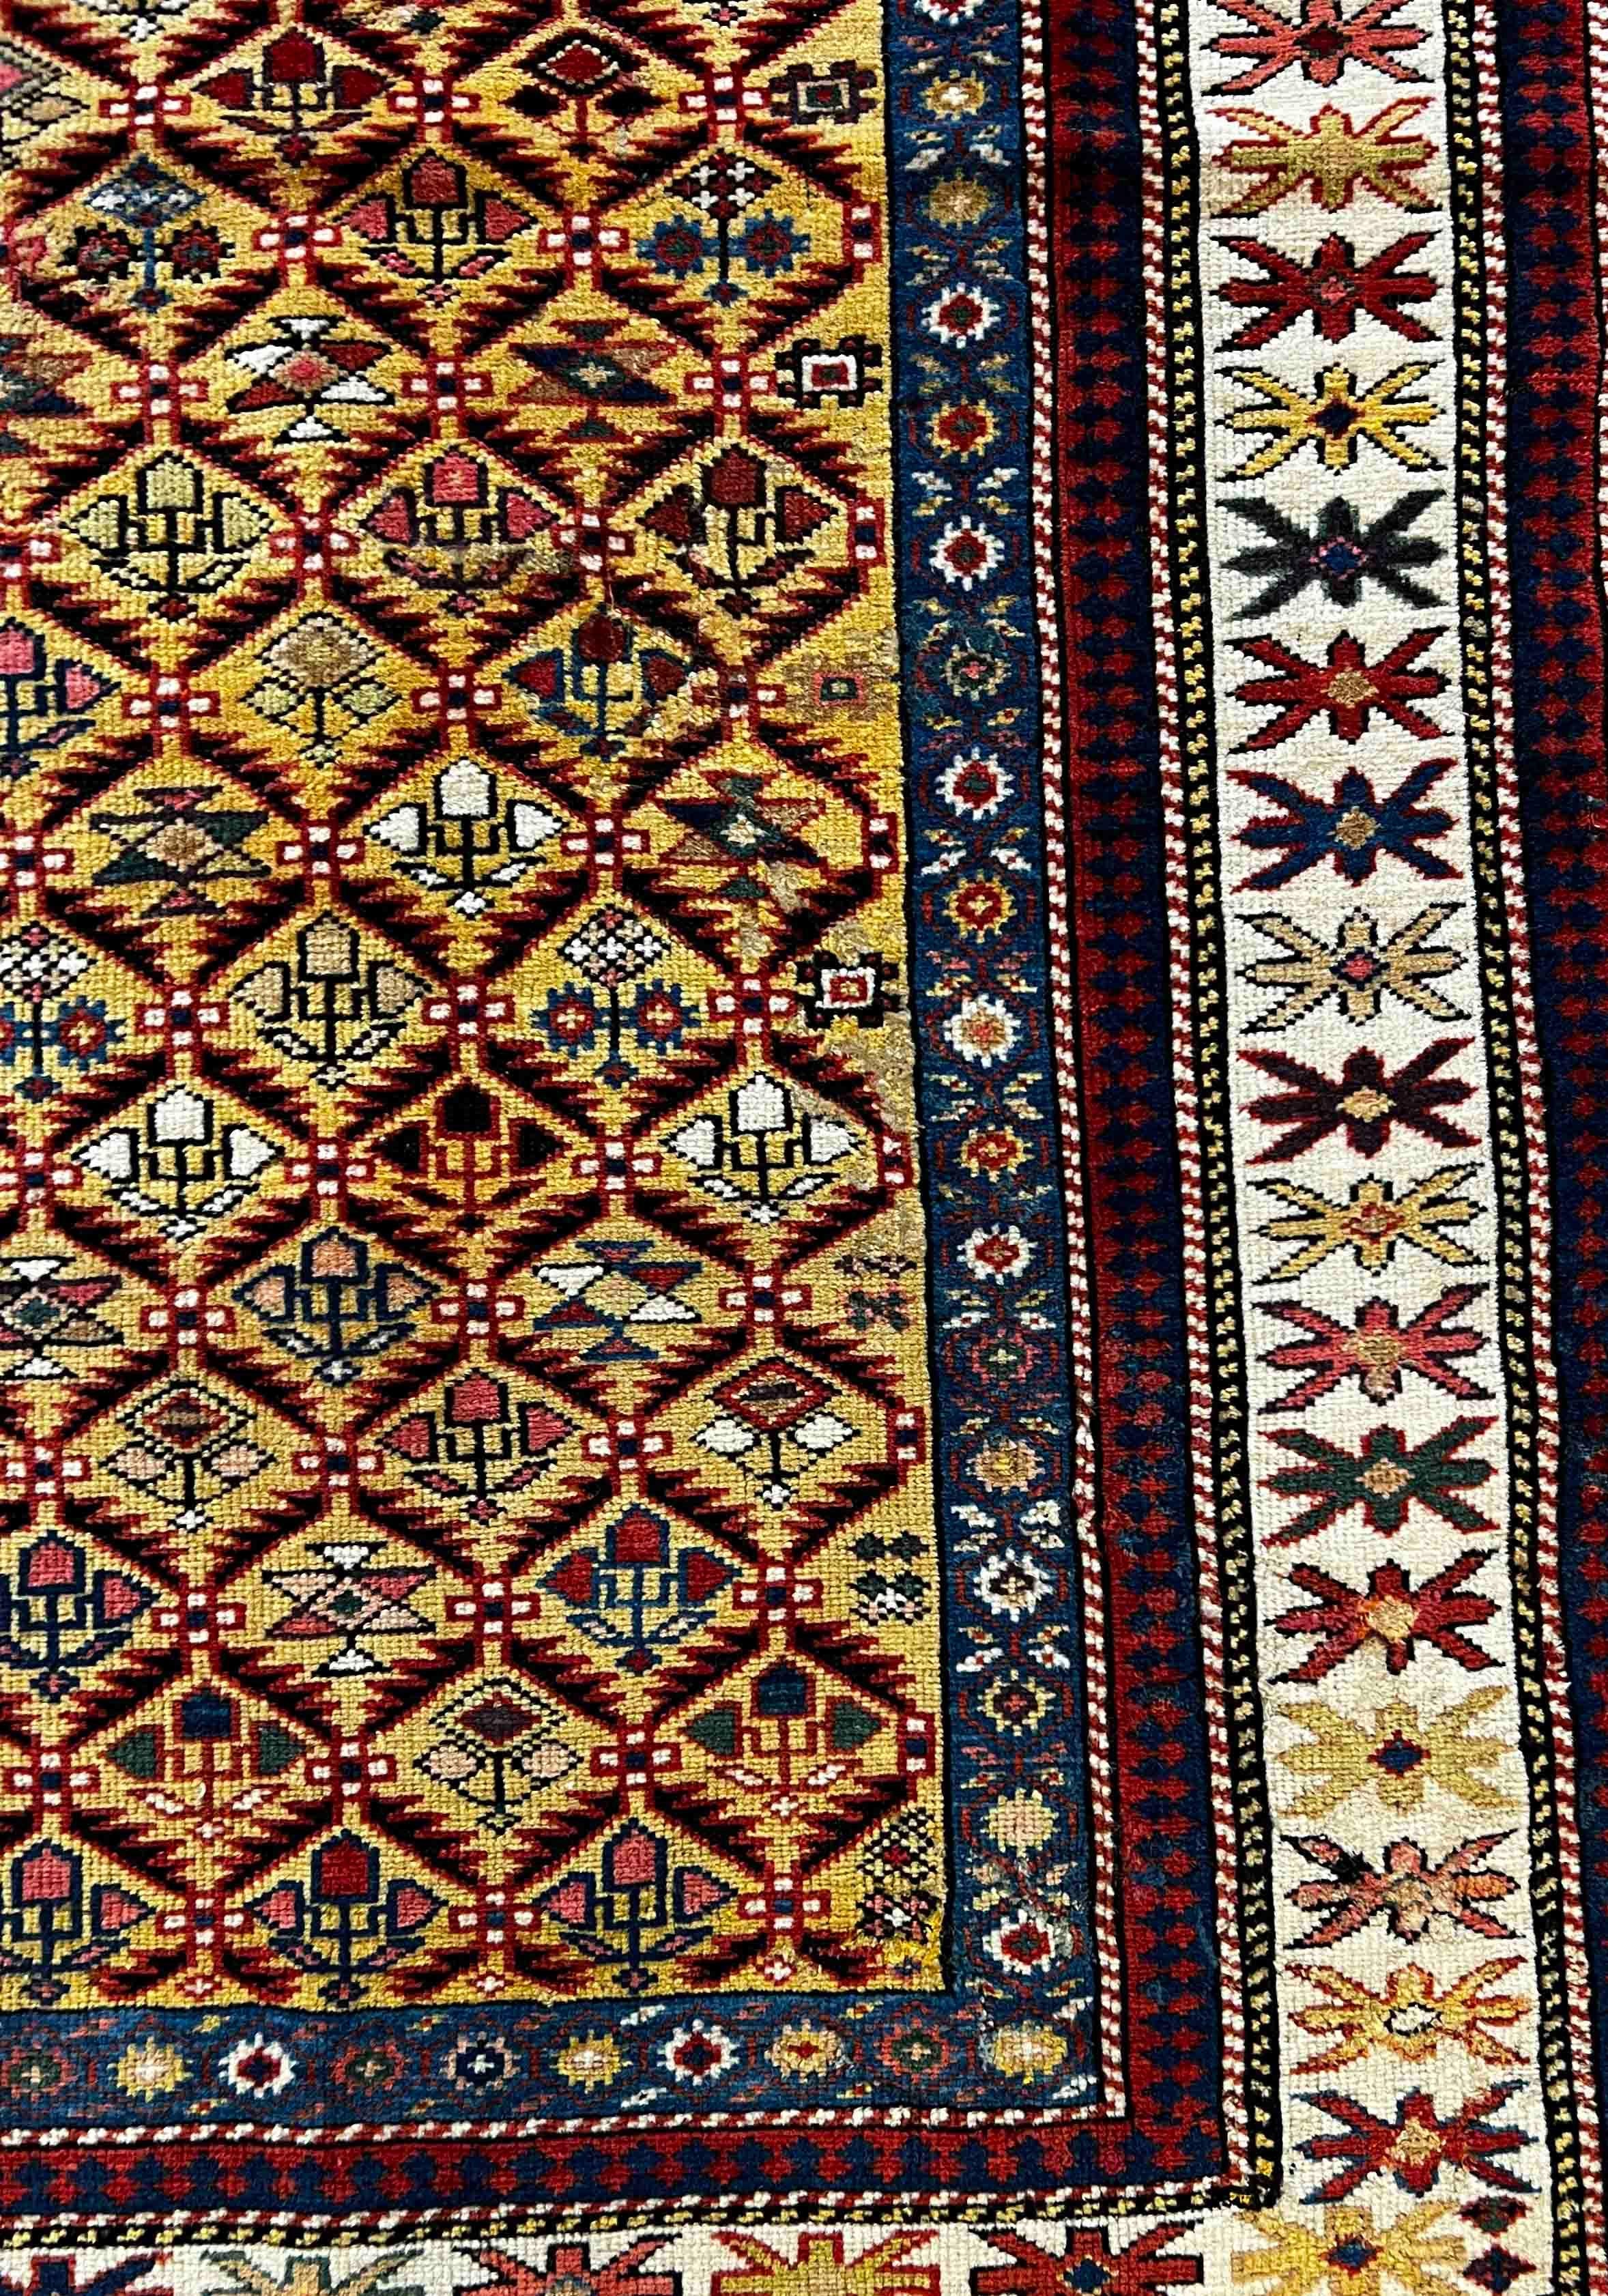  Daghestan Rug Russian wool, 19th Century - N° 635 In Excellent Condition For Sale In Paris, FR